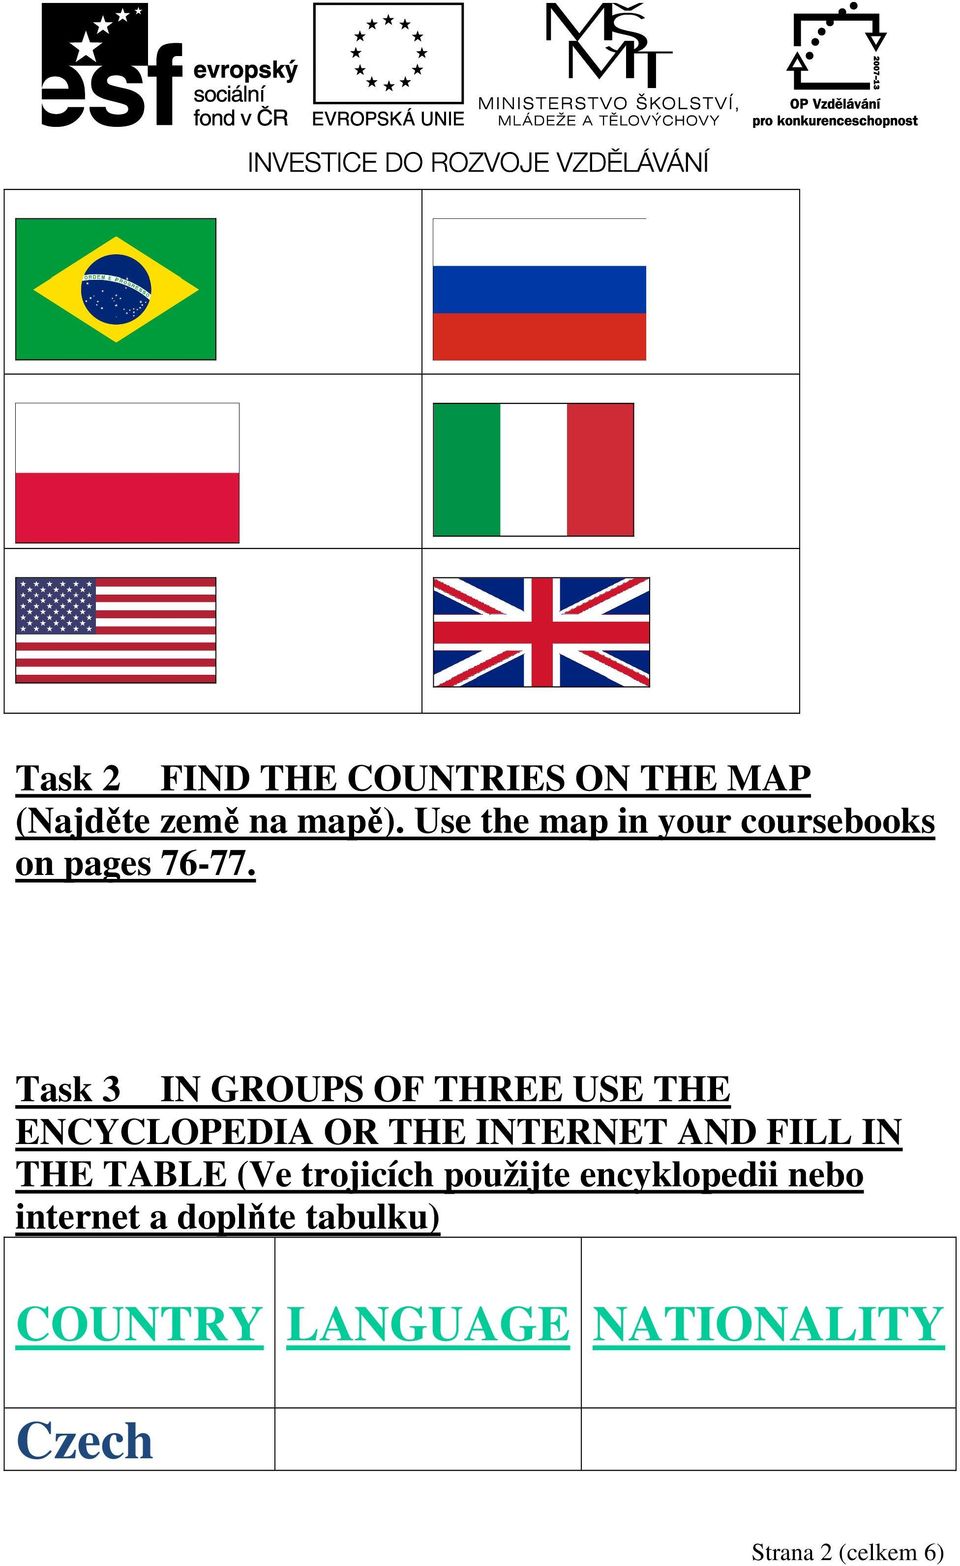 Task 3 IN GROUPS OF THREE USE THE ENCYCLOPEDIA OR THE INTERNET AND FILL IN THE